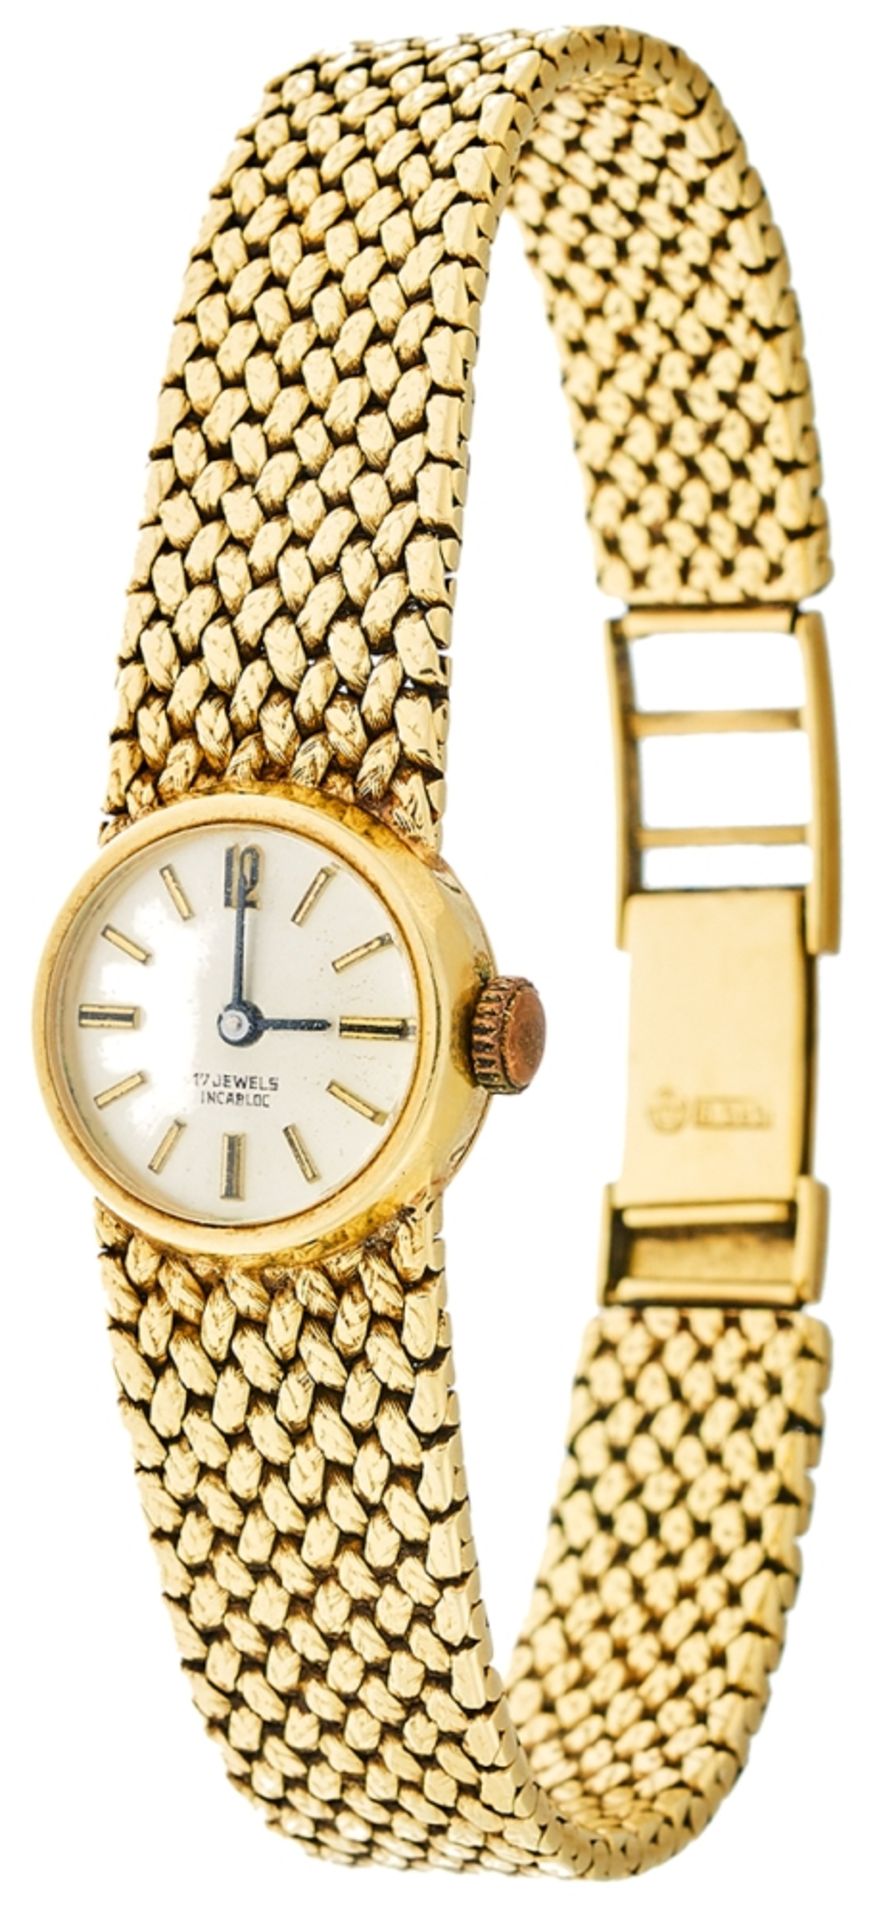 Womens watch with Milanese chain band. 1960er years. Watch case and watch band 585er yellow-gold